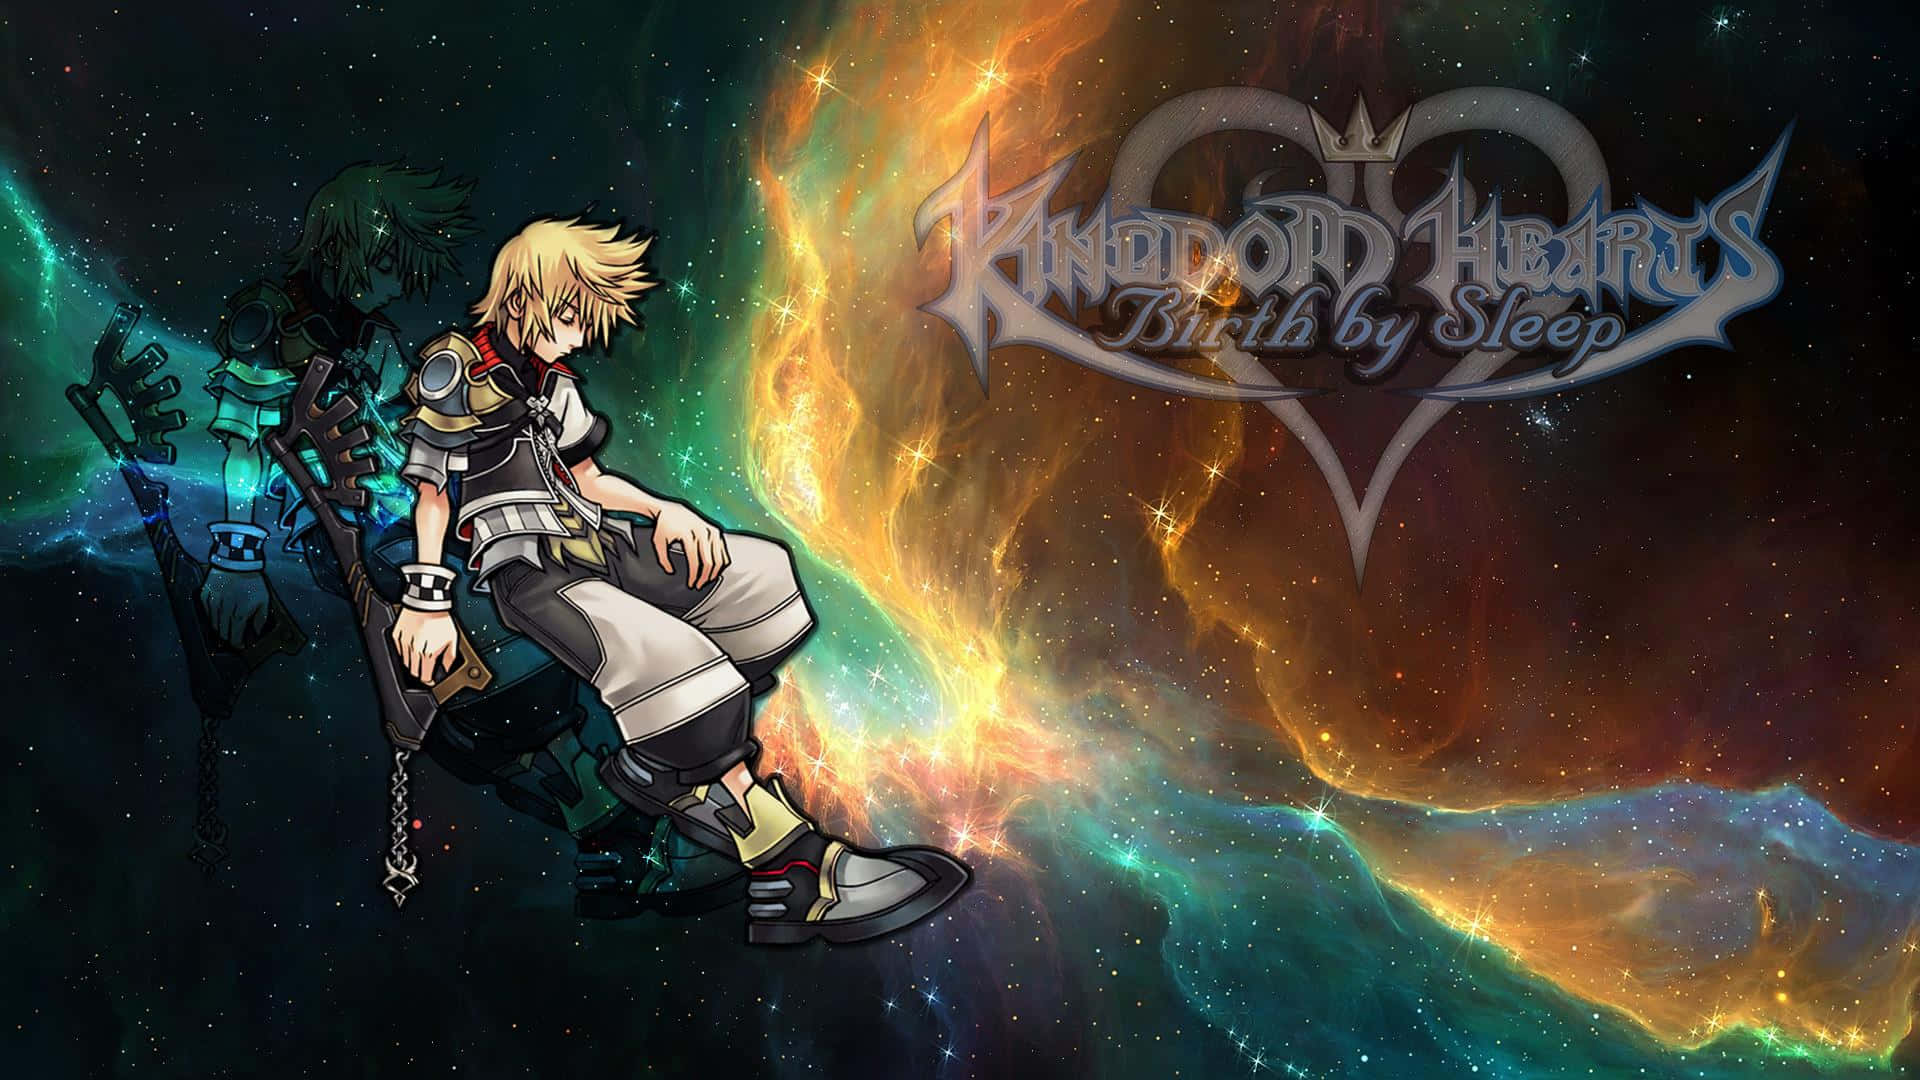 Riku from Kingdom Hearts with Way to the Dawn Keyblade Wallpaper